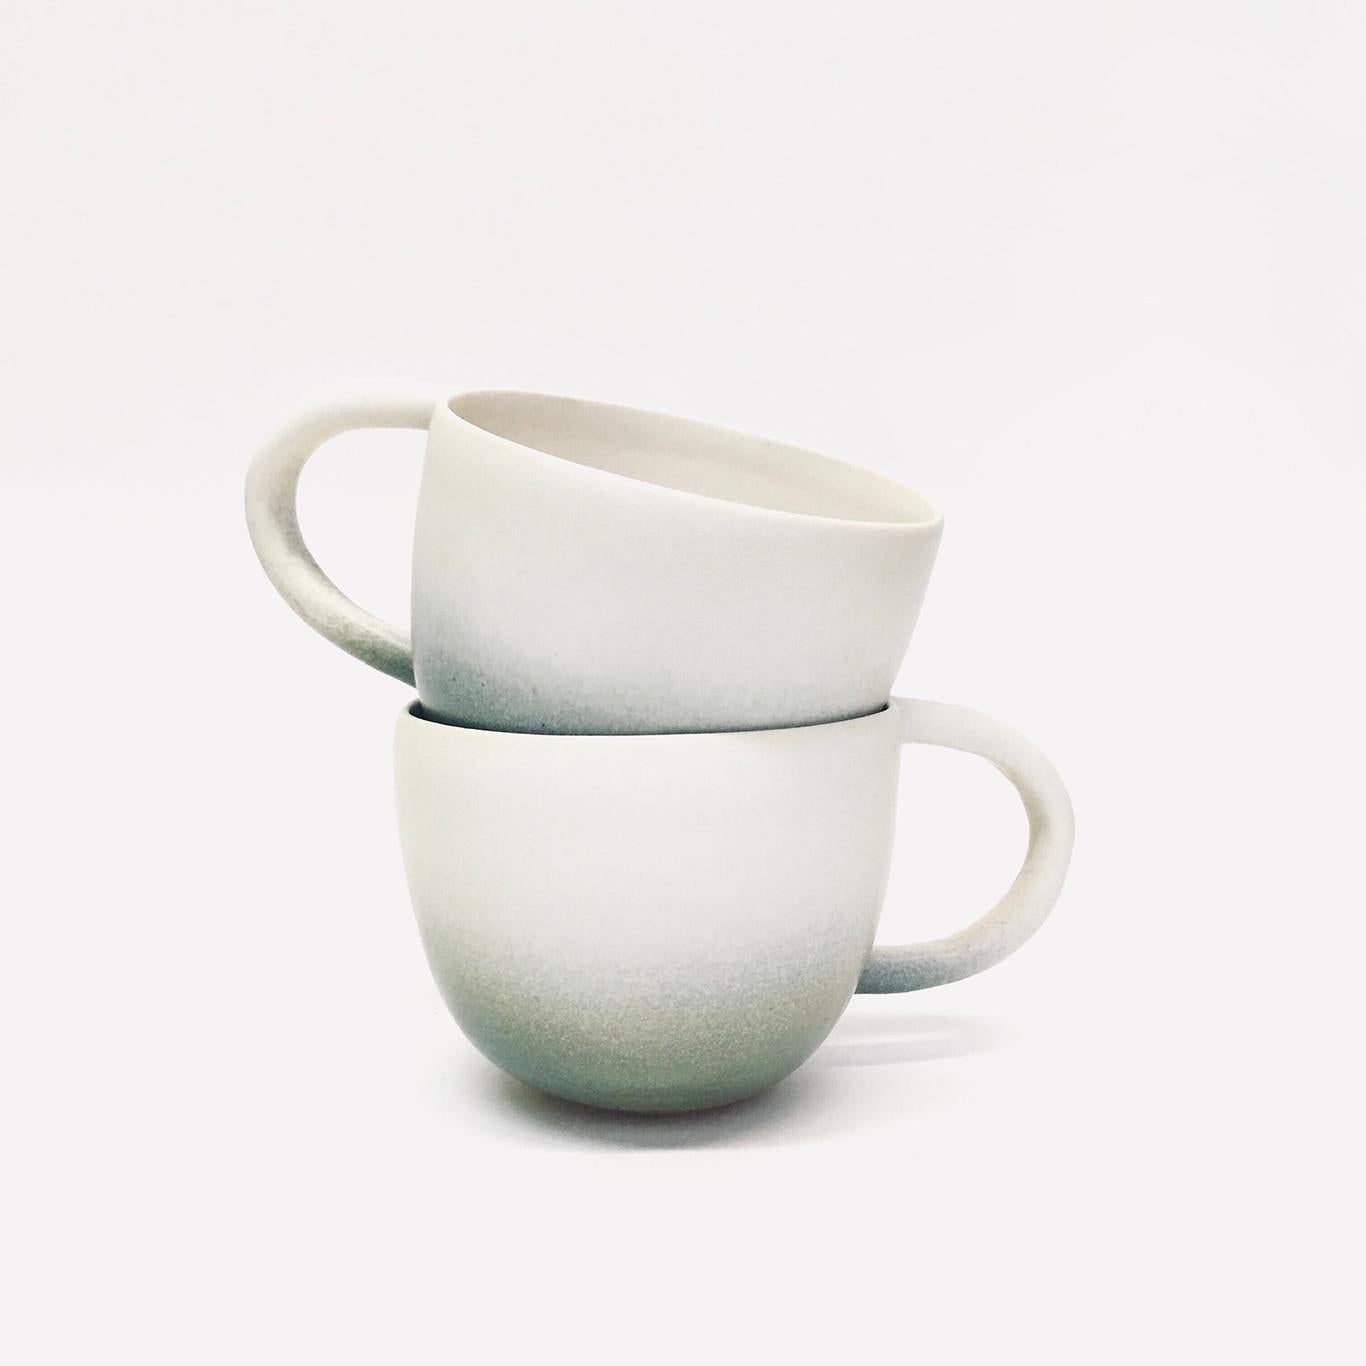 Set of two white stoneware mugs with a milk white satin glaze with a slate finish.

Each mug approximately 6” x 4.25” x 3.5”

Carol Joo Lee is an artist who loves working with clay and chasing that perfect glaze moment. 


